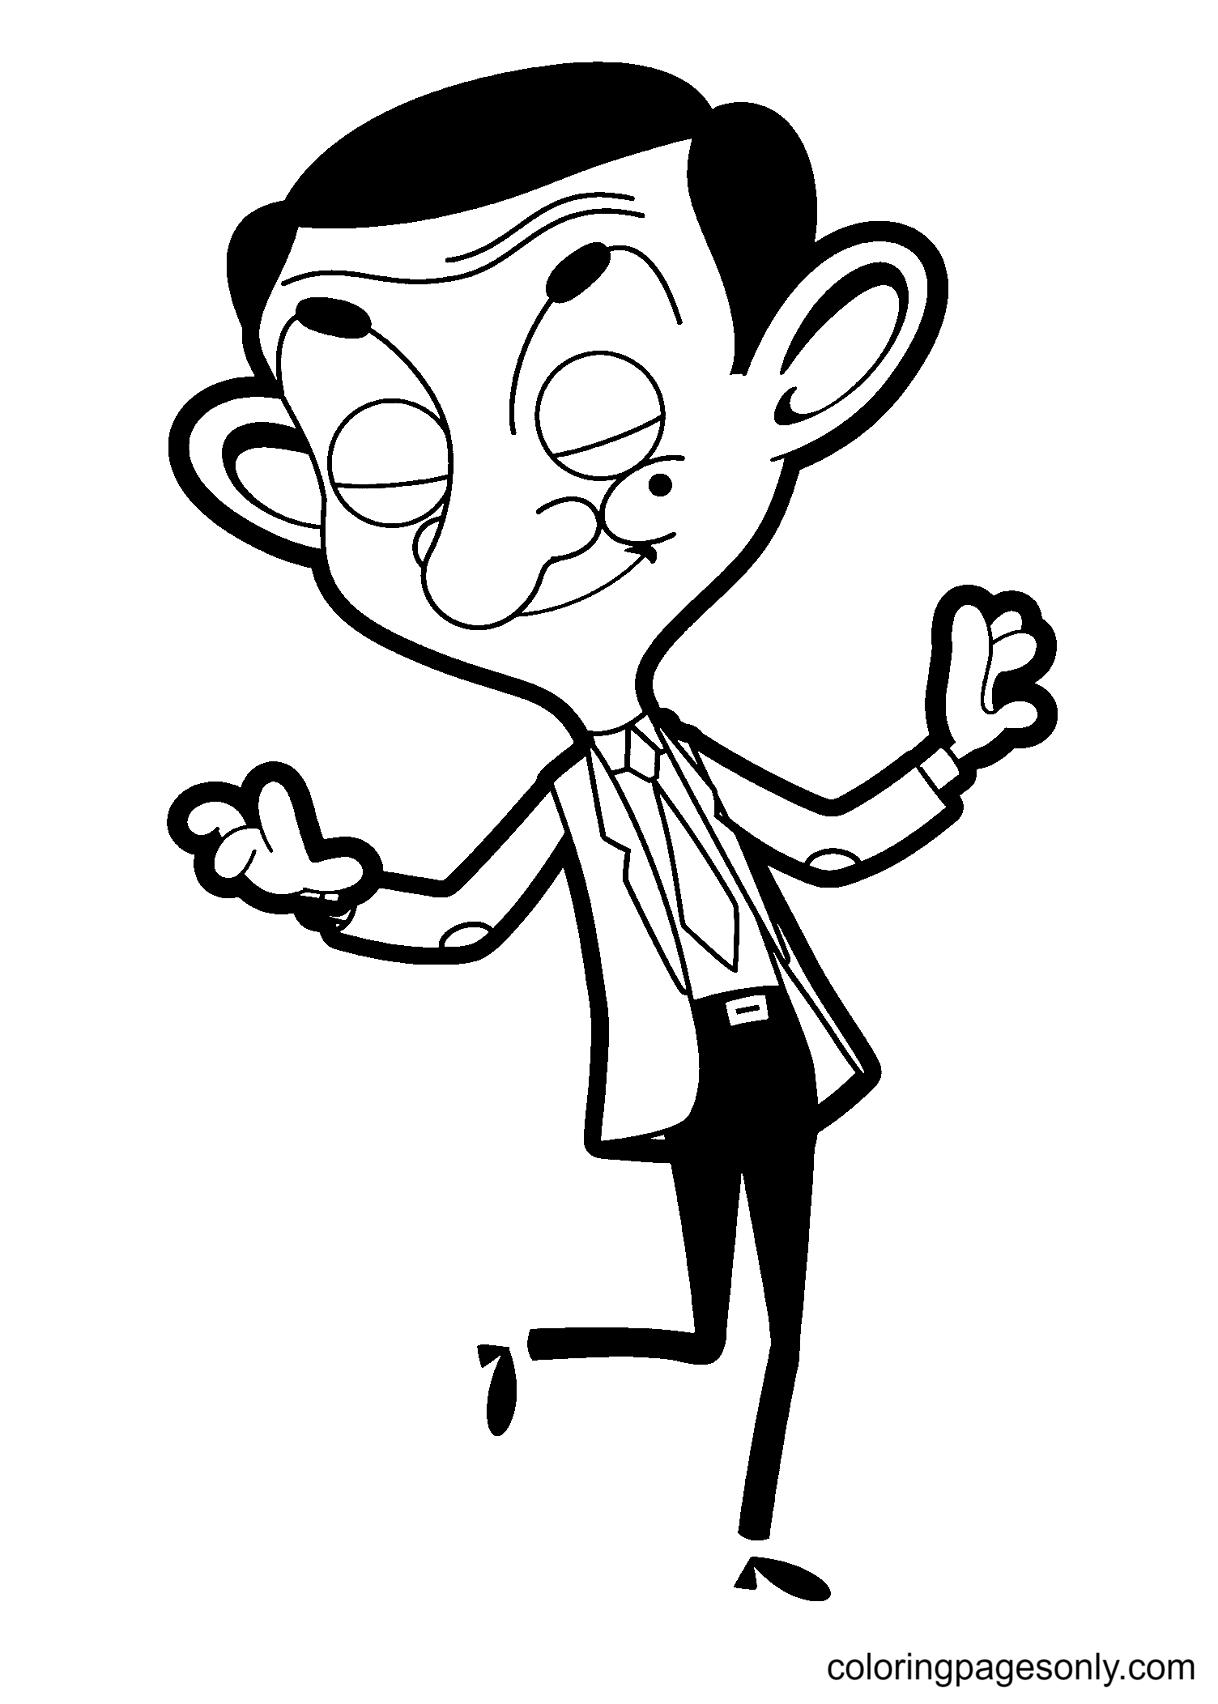 Mr Bean Coloring Page